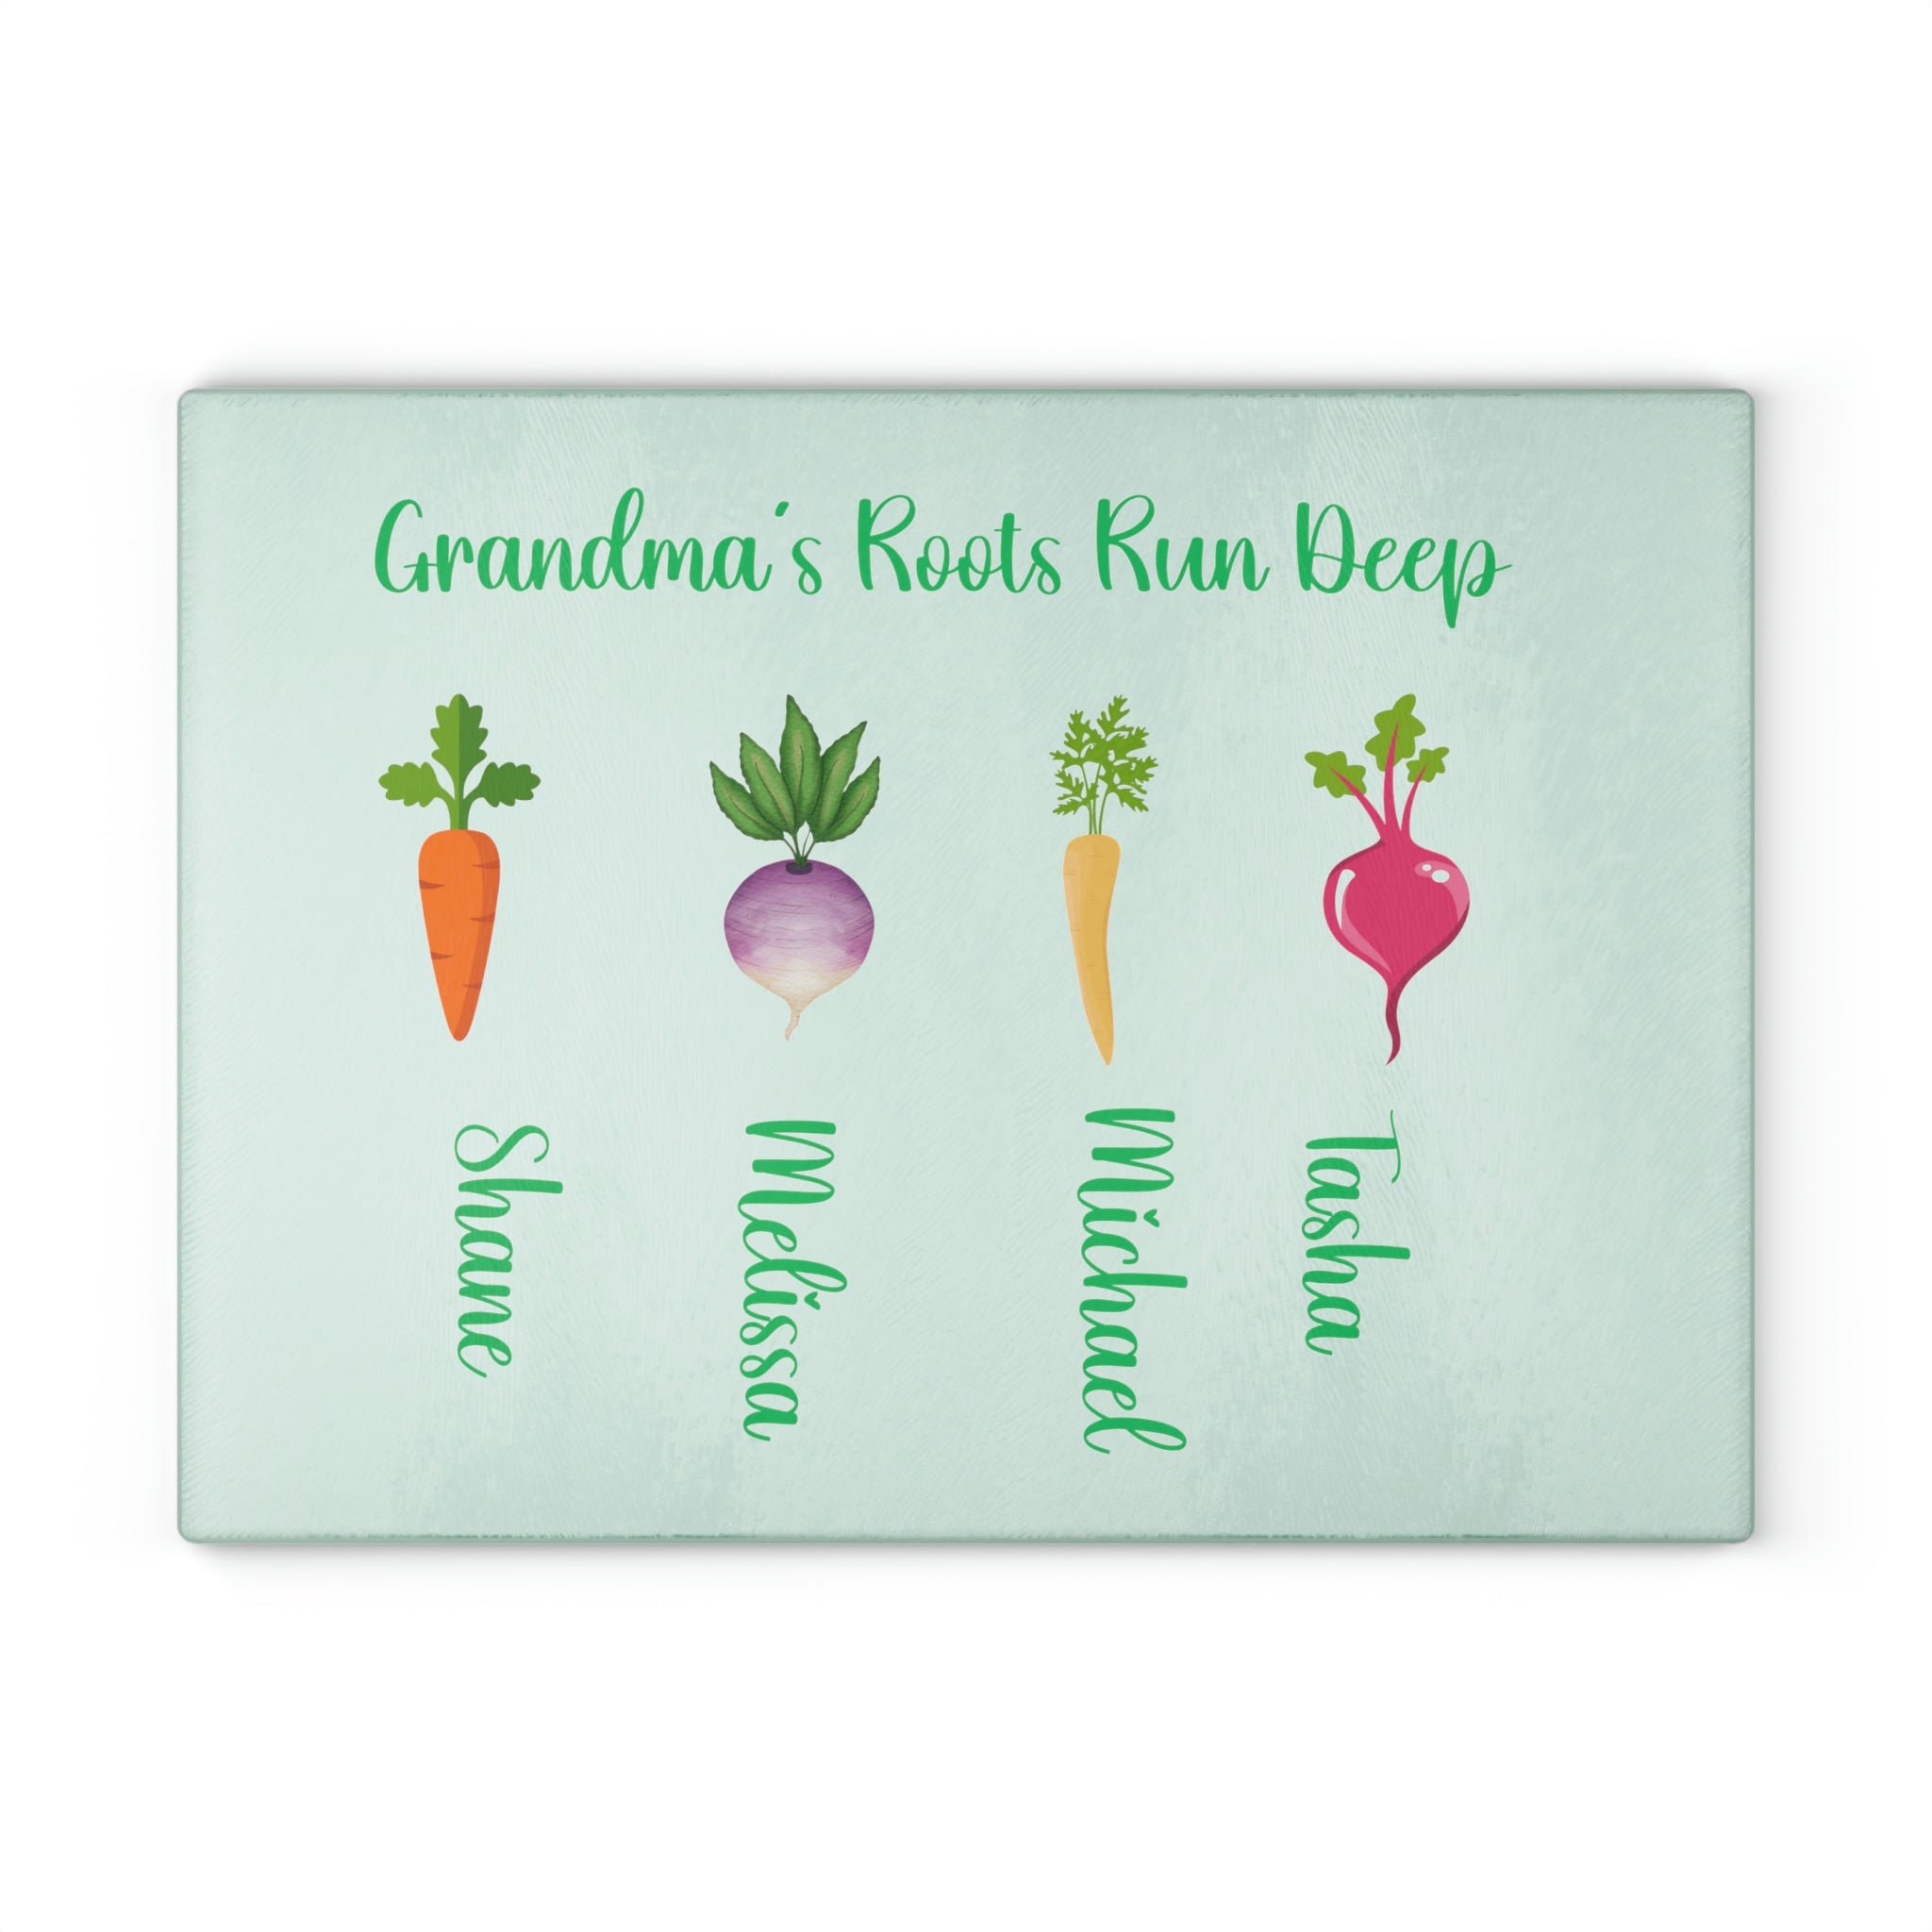 Grandma's Roots Run Deep Personalized Glass Cutting Board with Grandkids' Names